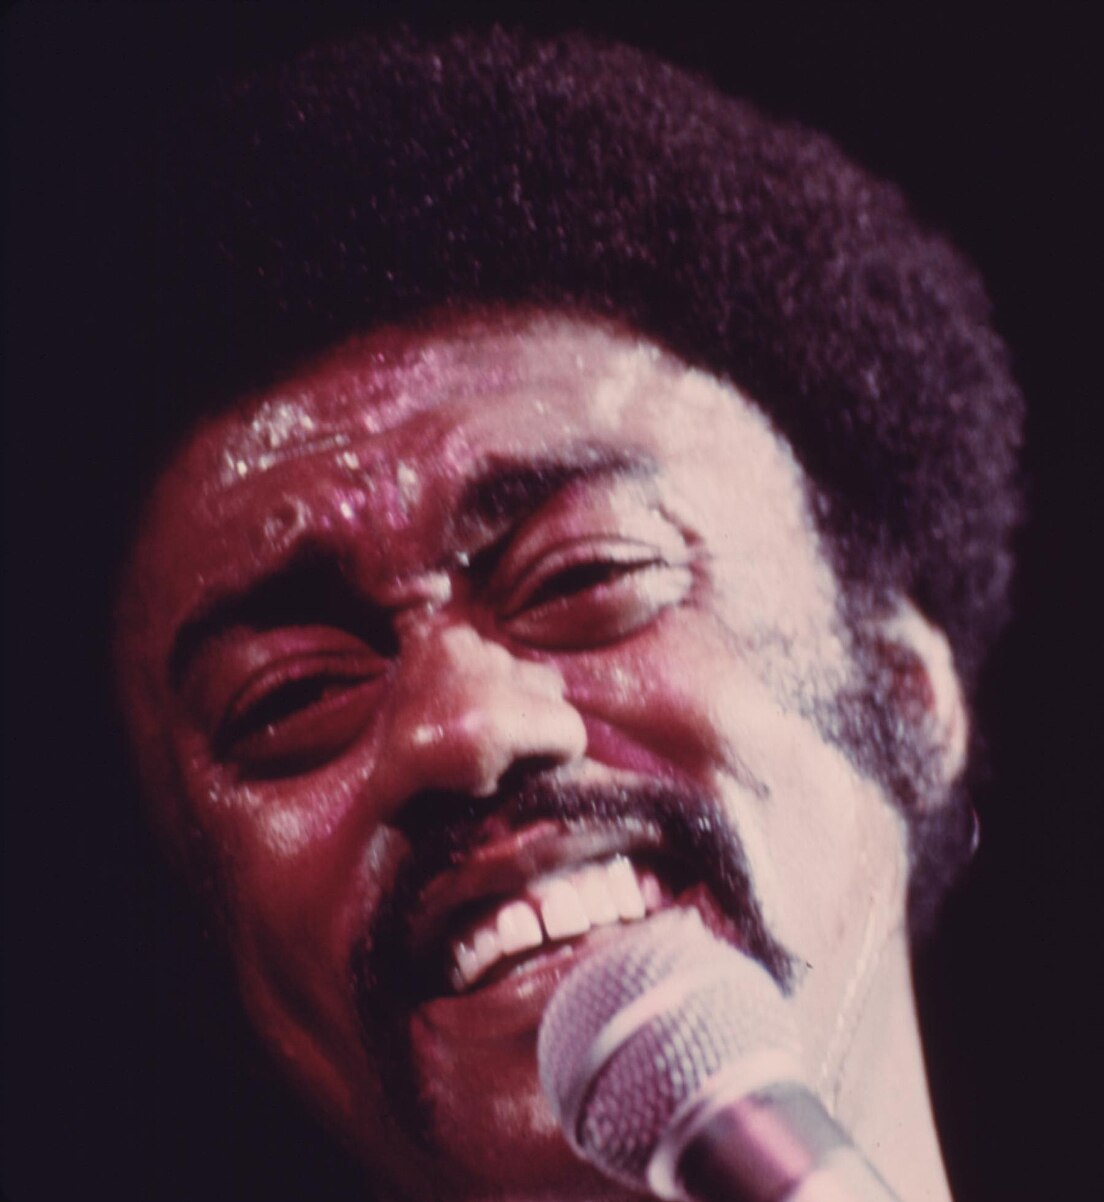 Johnnie Taylor - Just the One (I've Been Looking For)